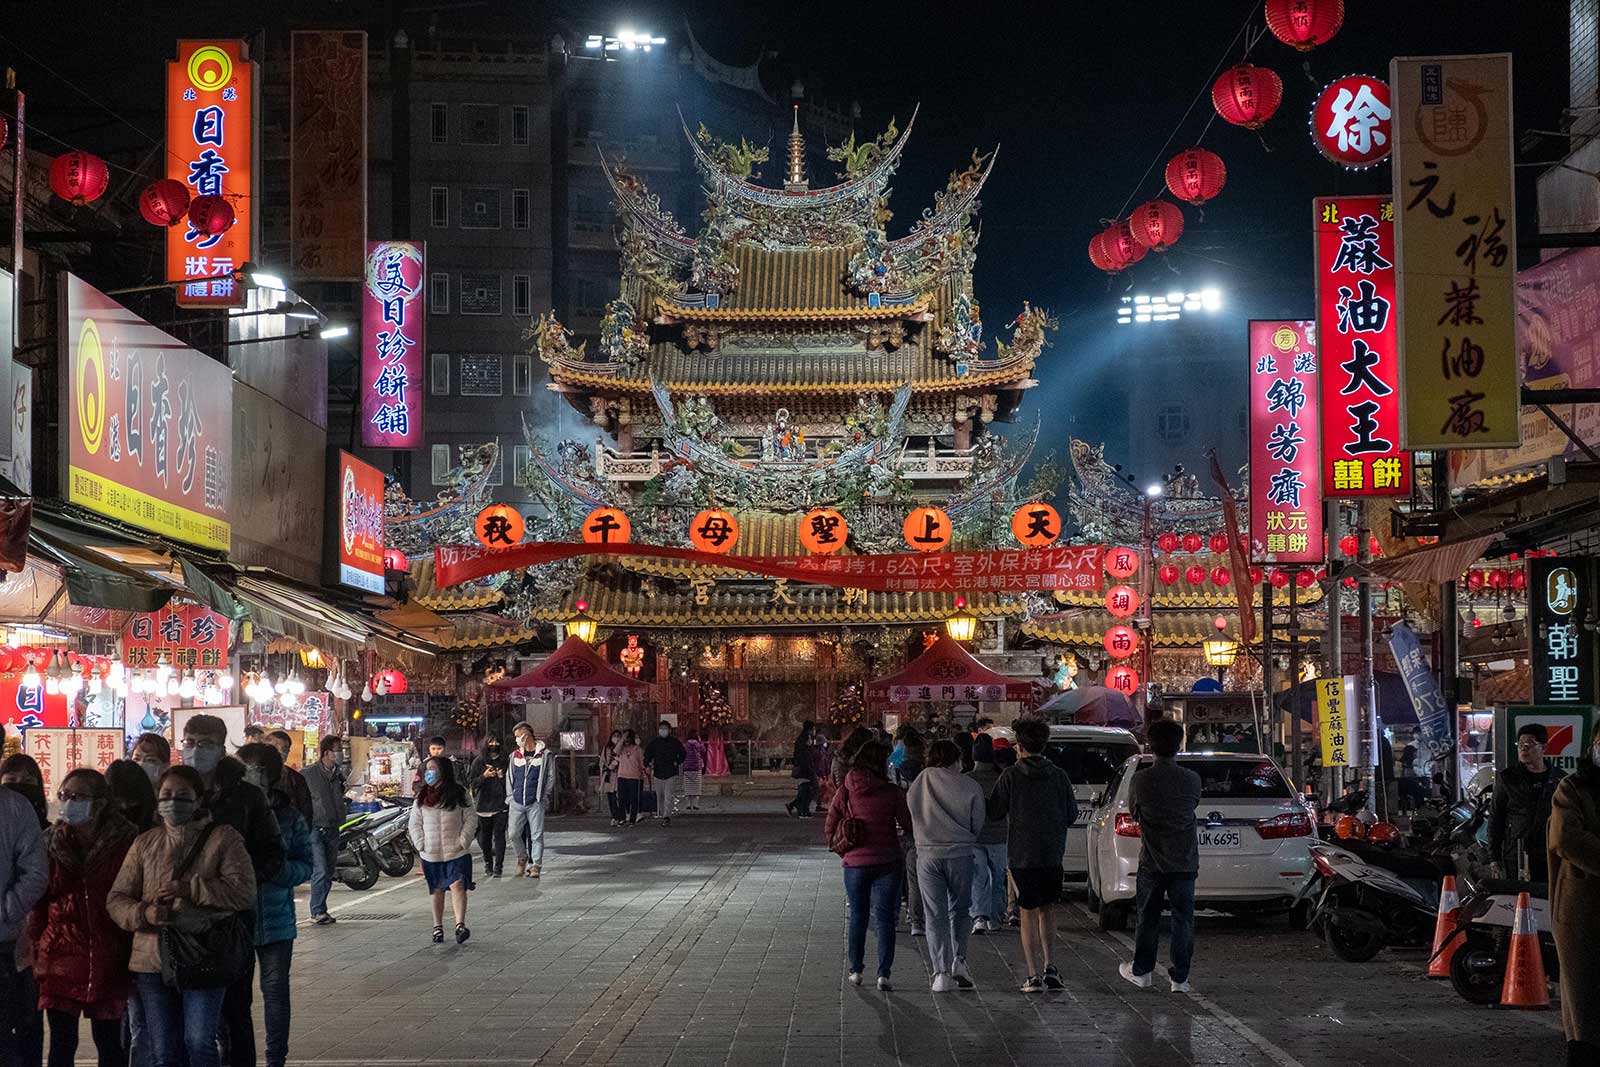 A view of Chaotian Temple from Beigang Old Street.